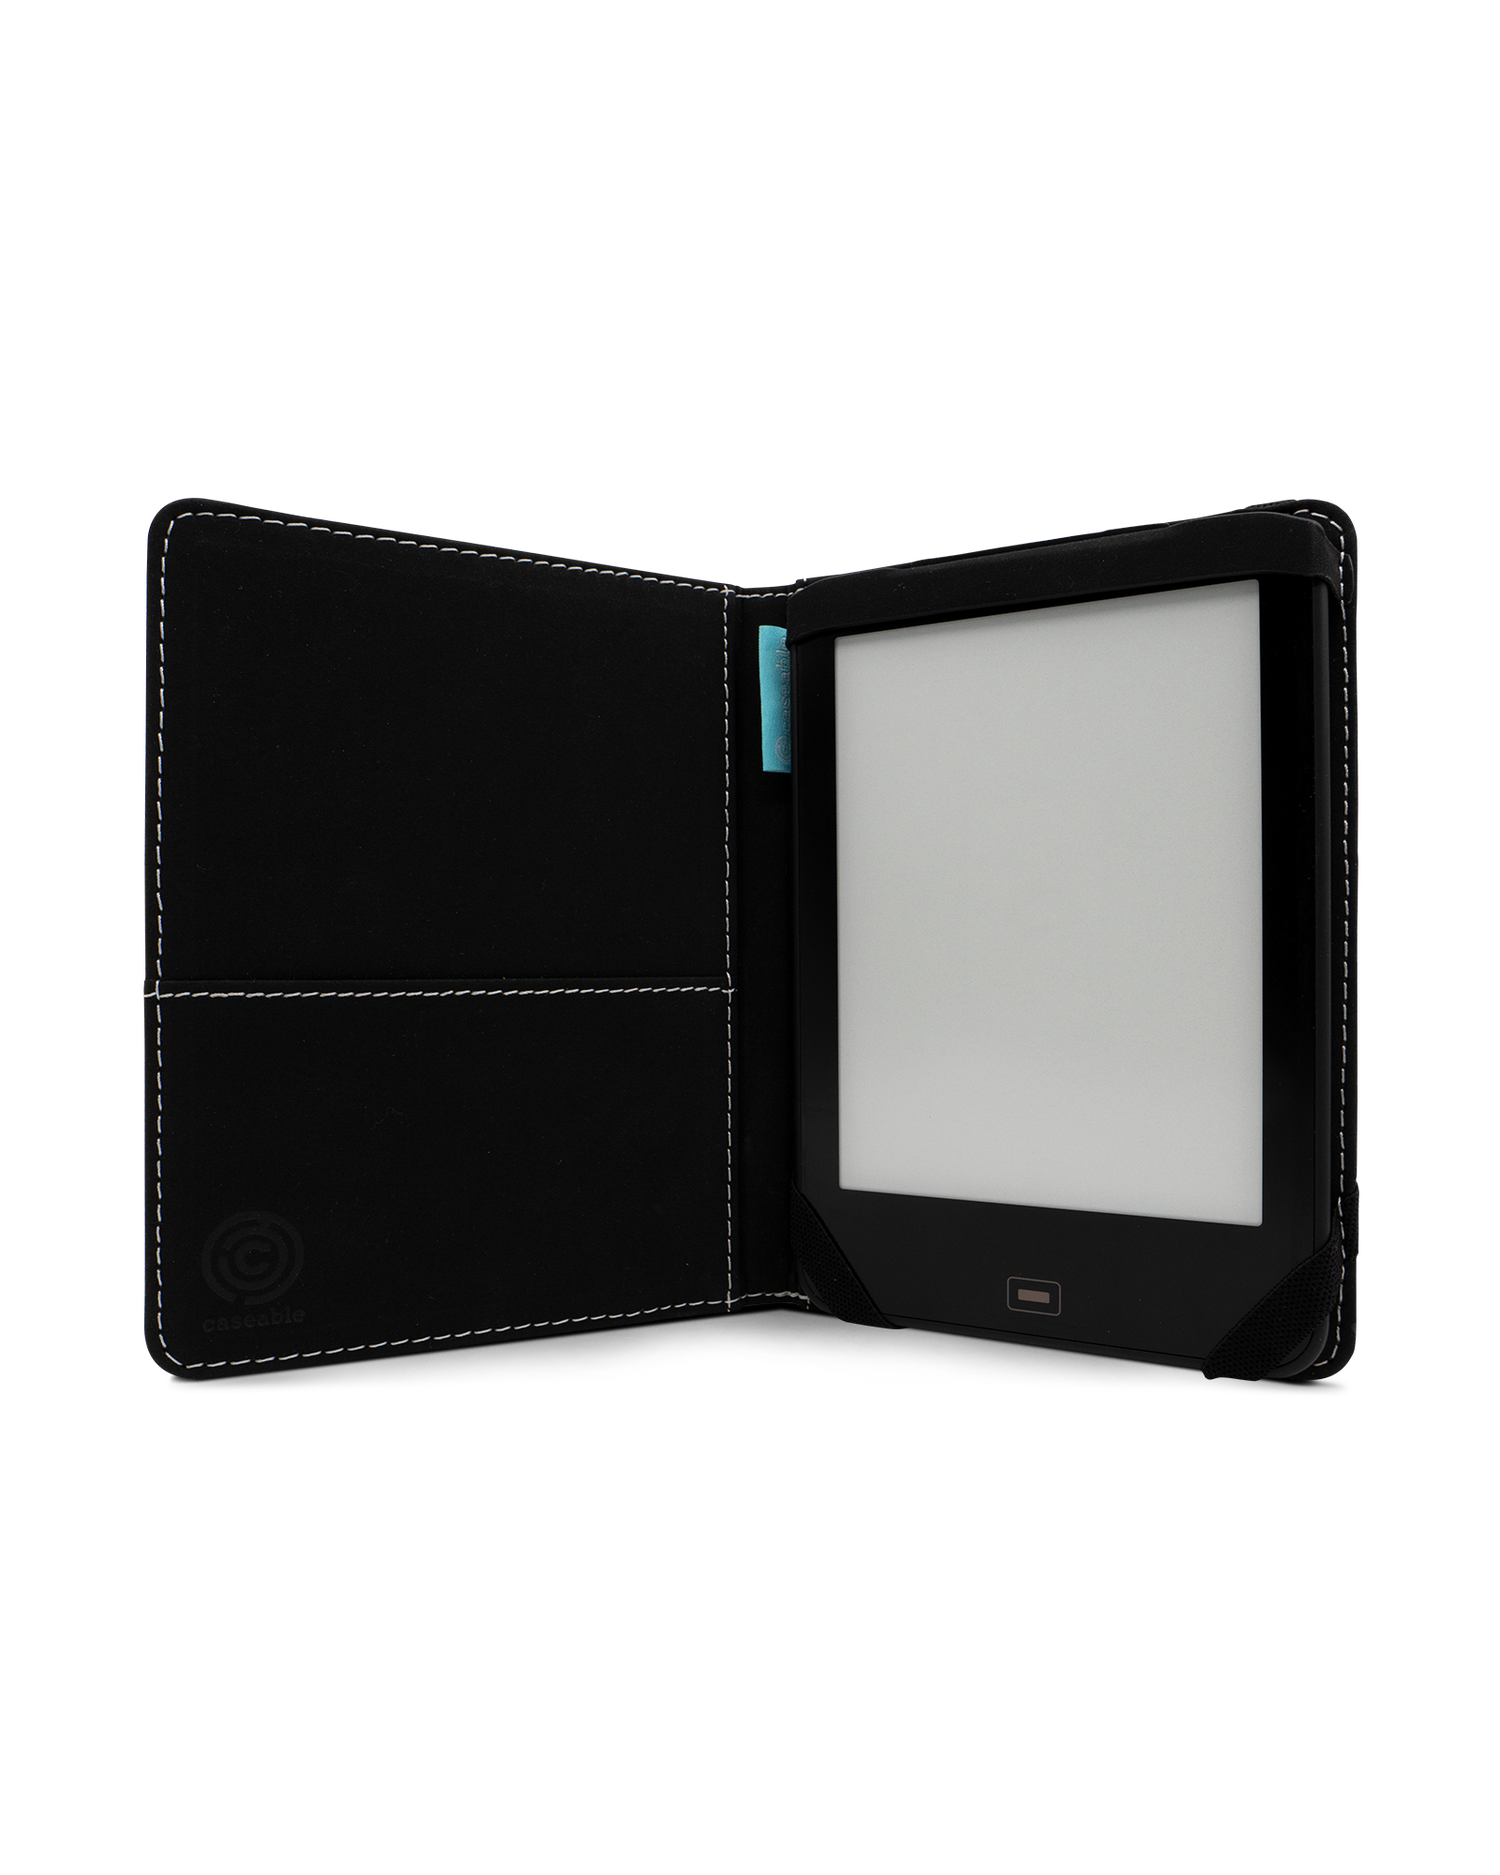 Forest eReader Case for tolino vision 1 to 4 HD: Opened interior view